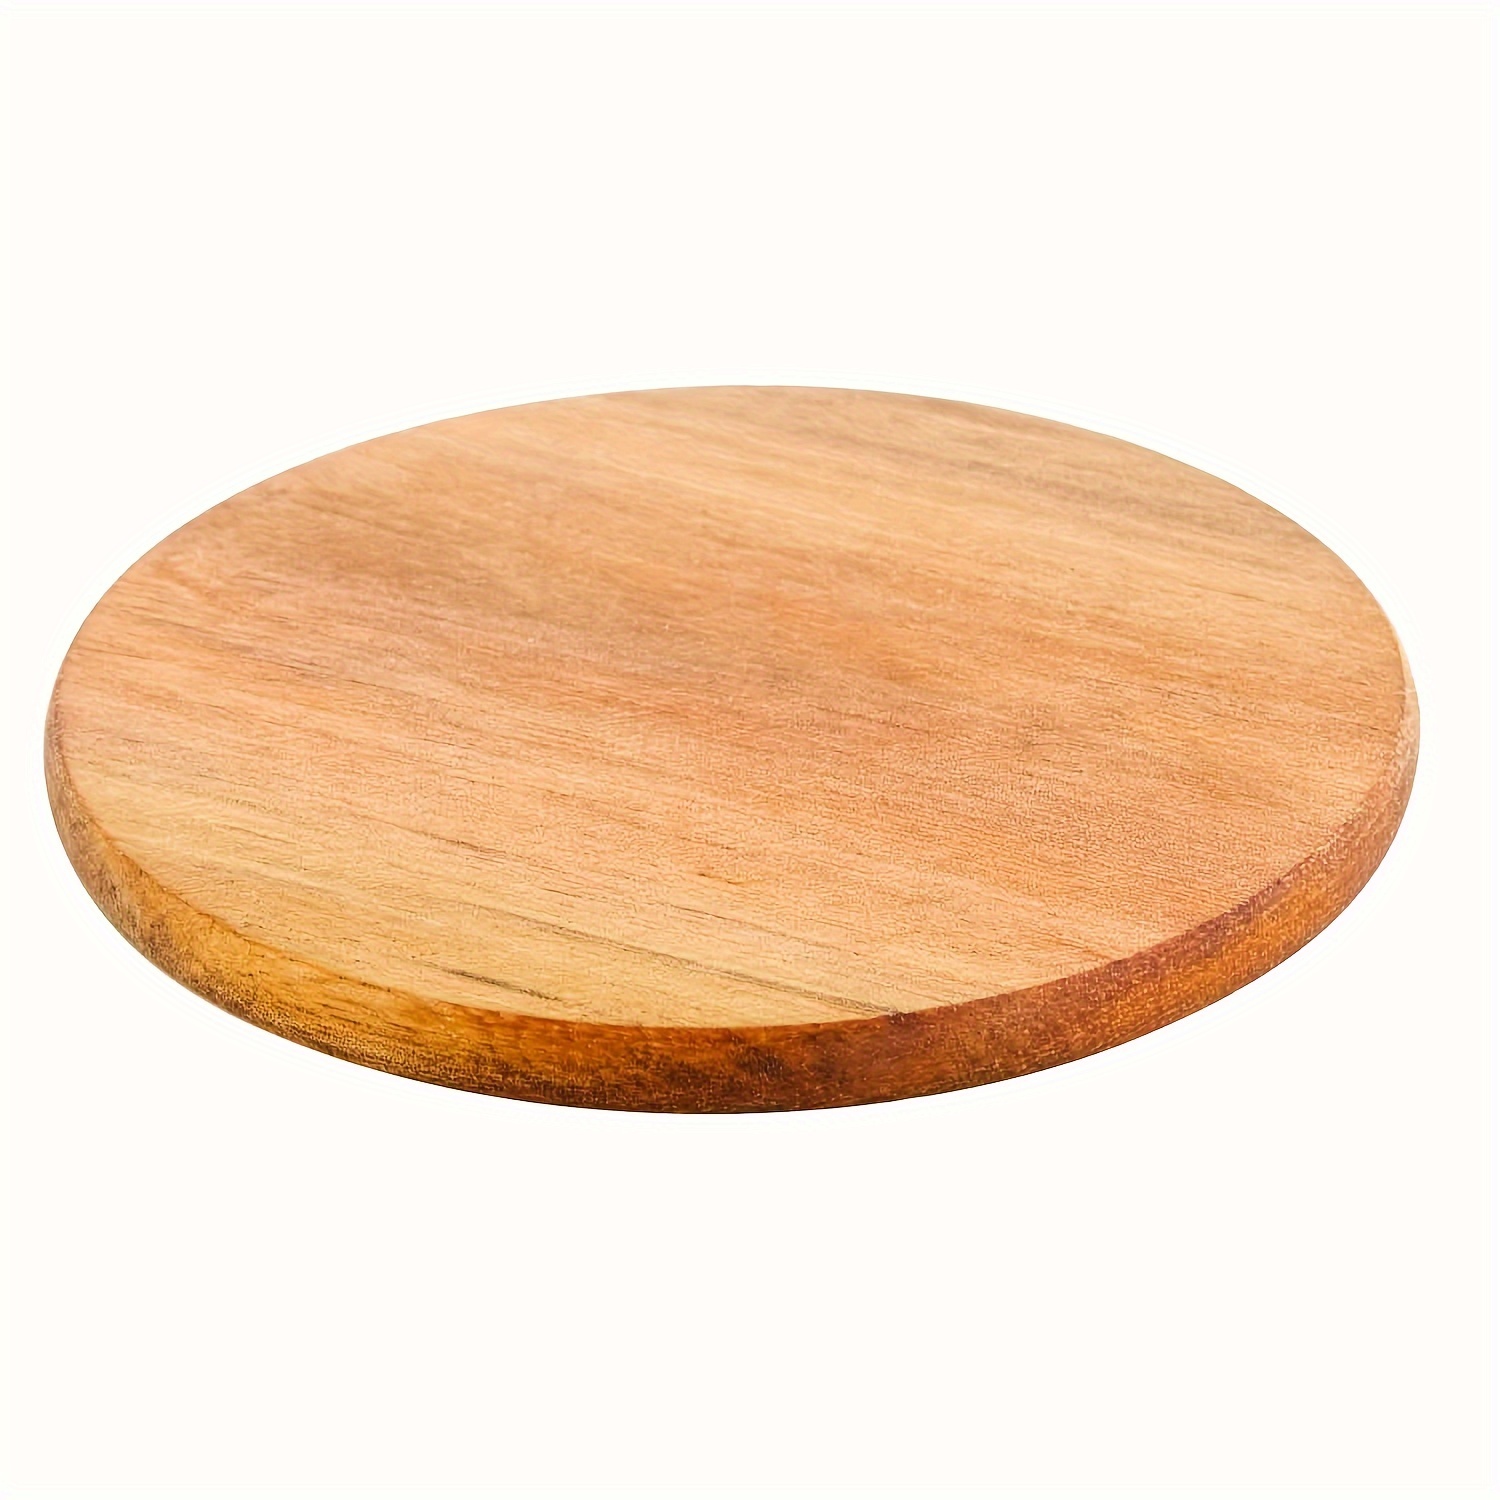 Acacia Wood Coasters For Coffee Table - Wooden Coasters For Drinks